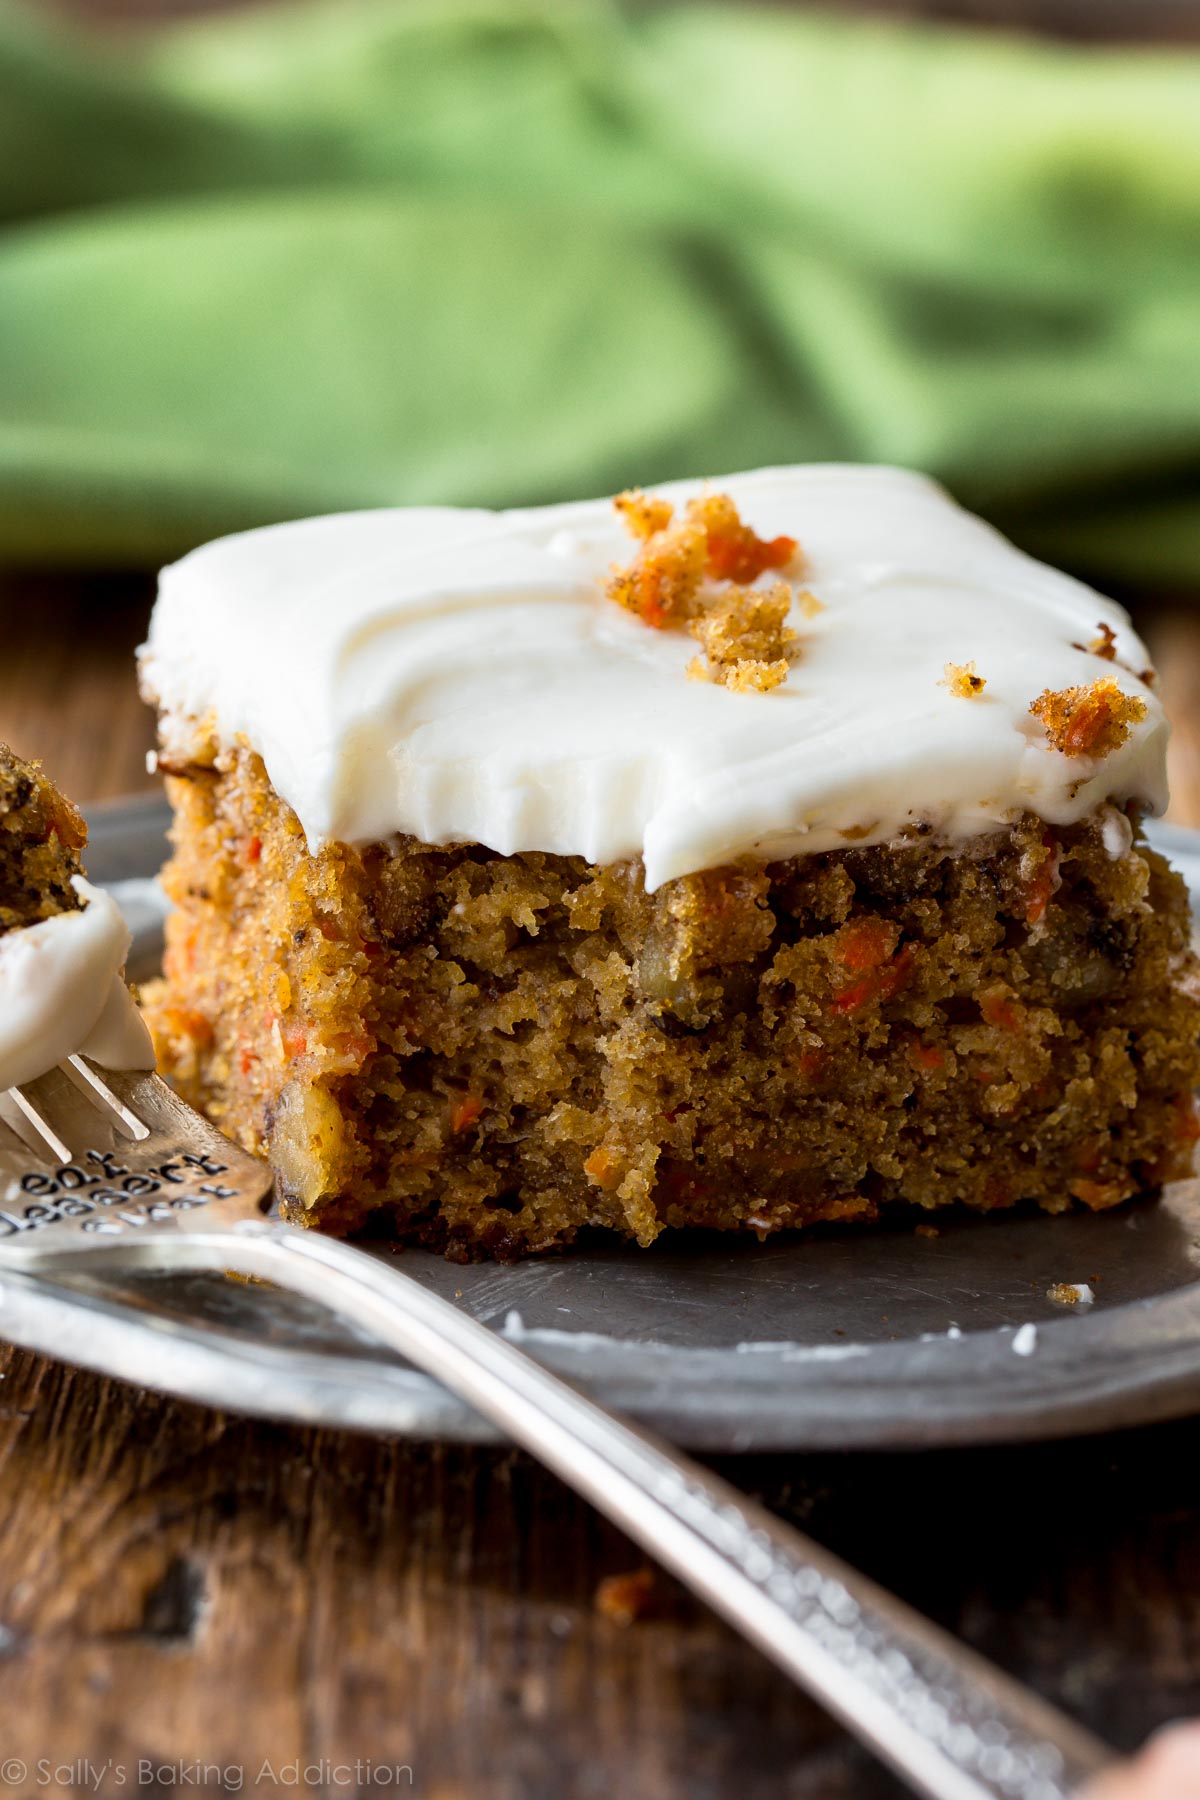 Celebration Carrot Cake | Lovefoodies